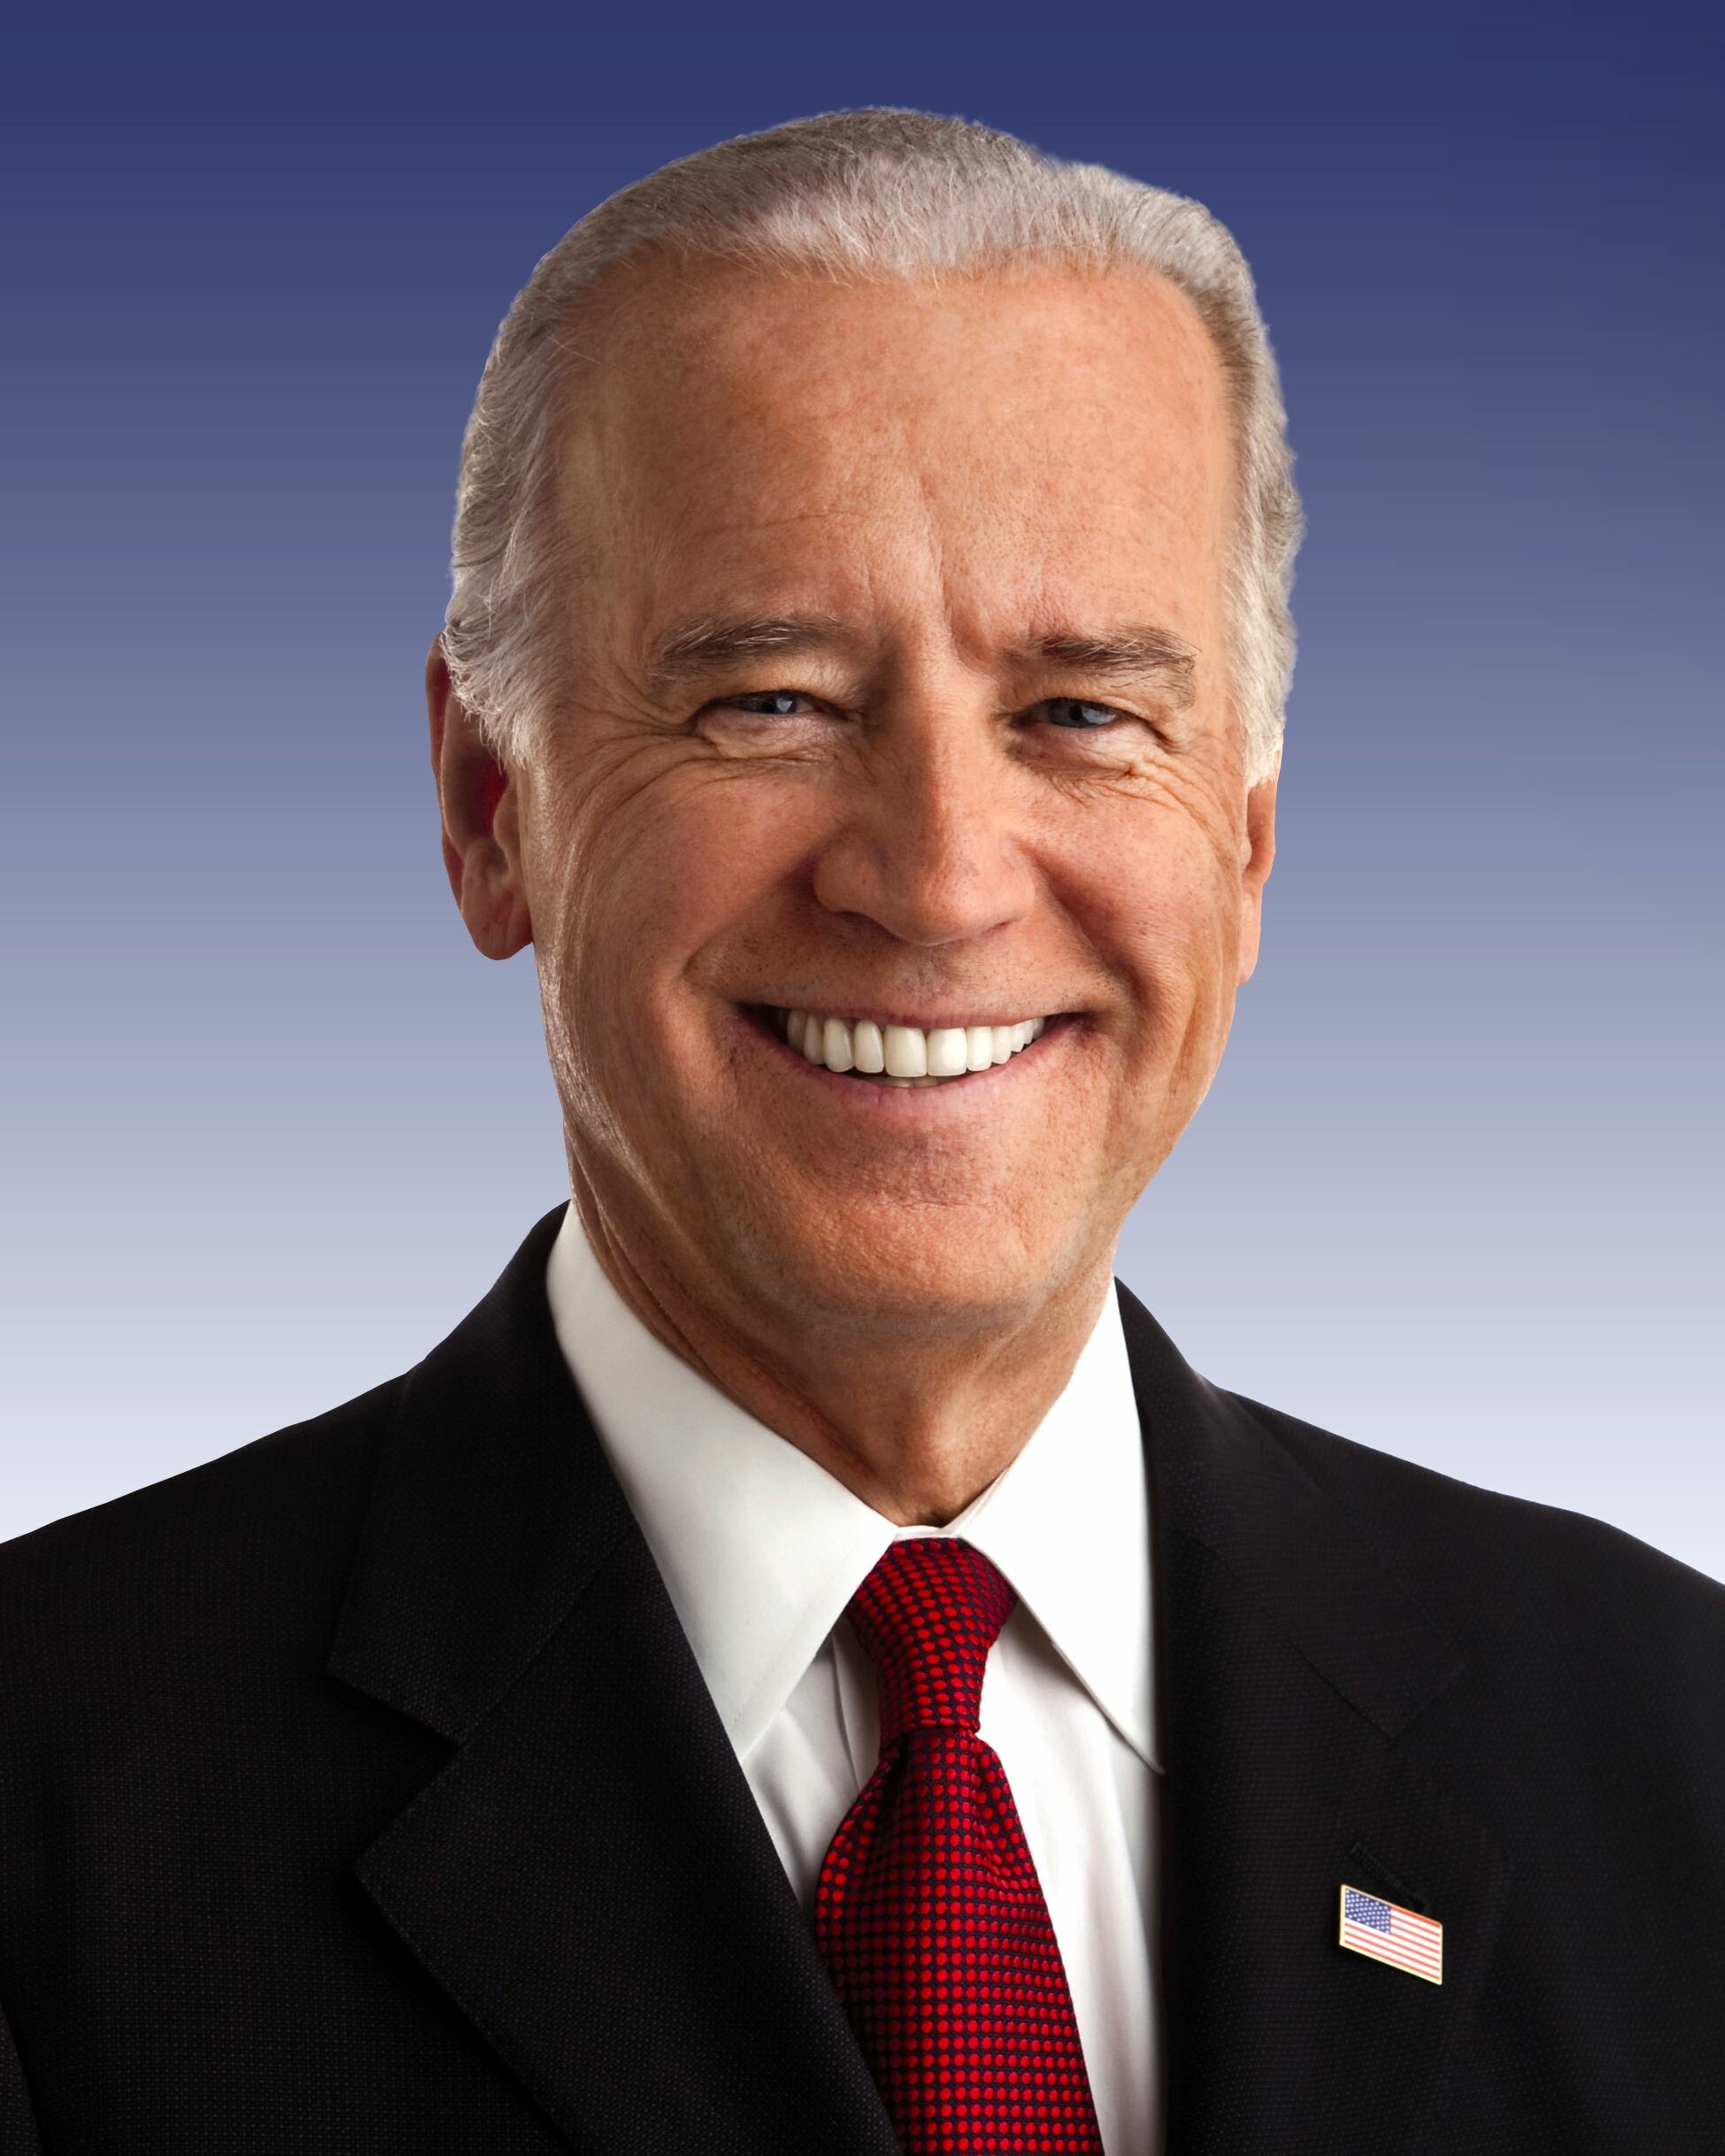 Joe Biden: Studied at the University of Delaware before earning his law degree from Syracuse University. 1950x2440 HD Wallpaper.